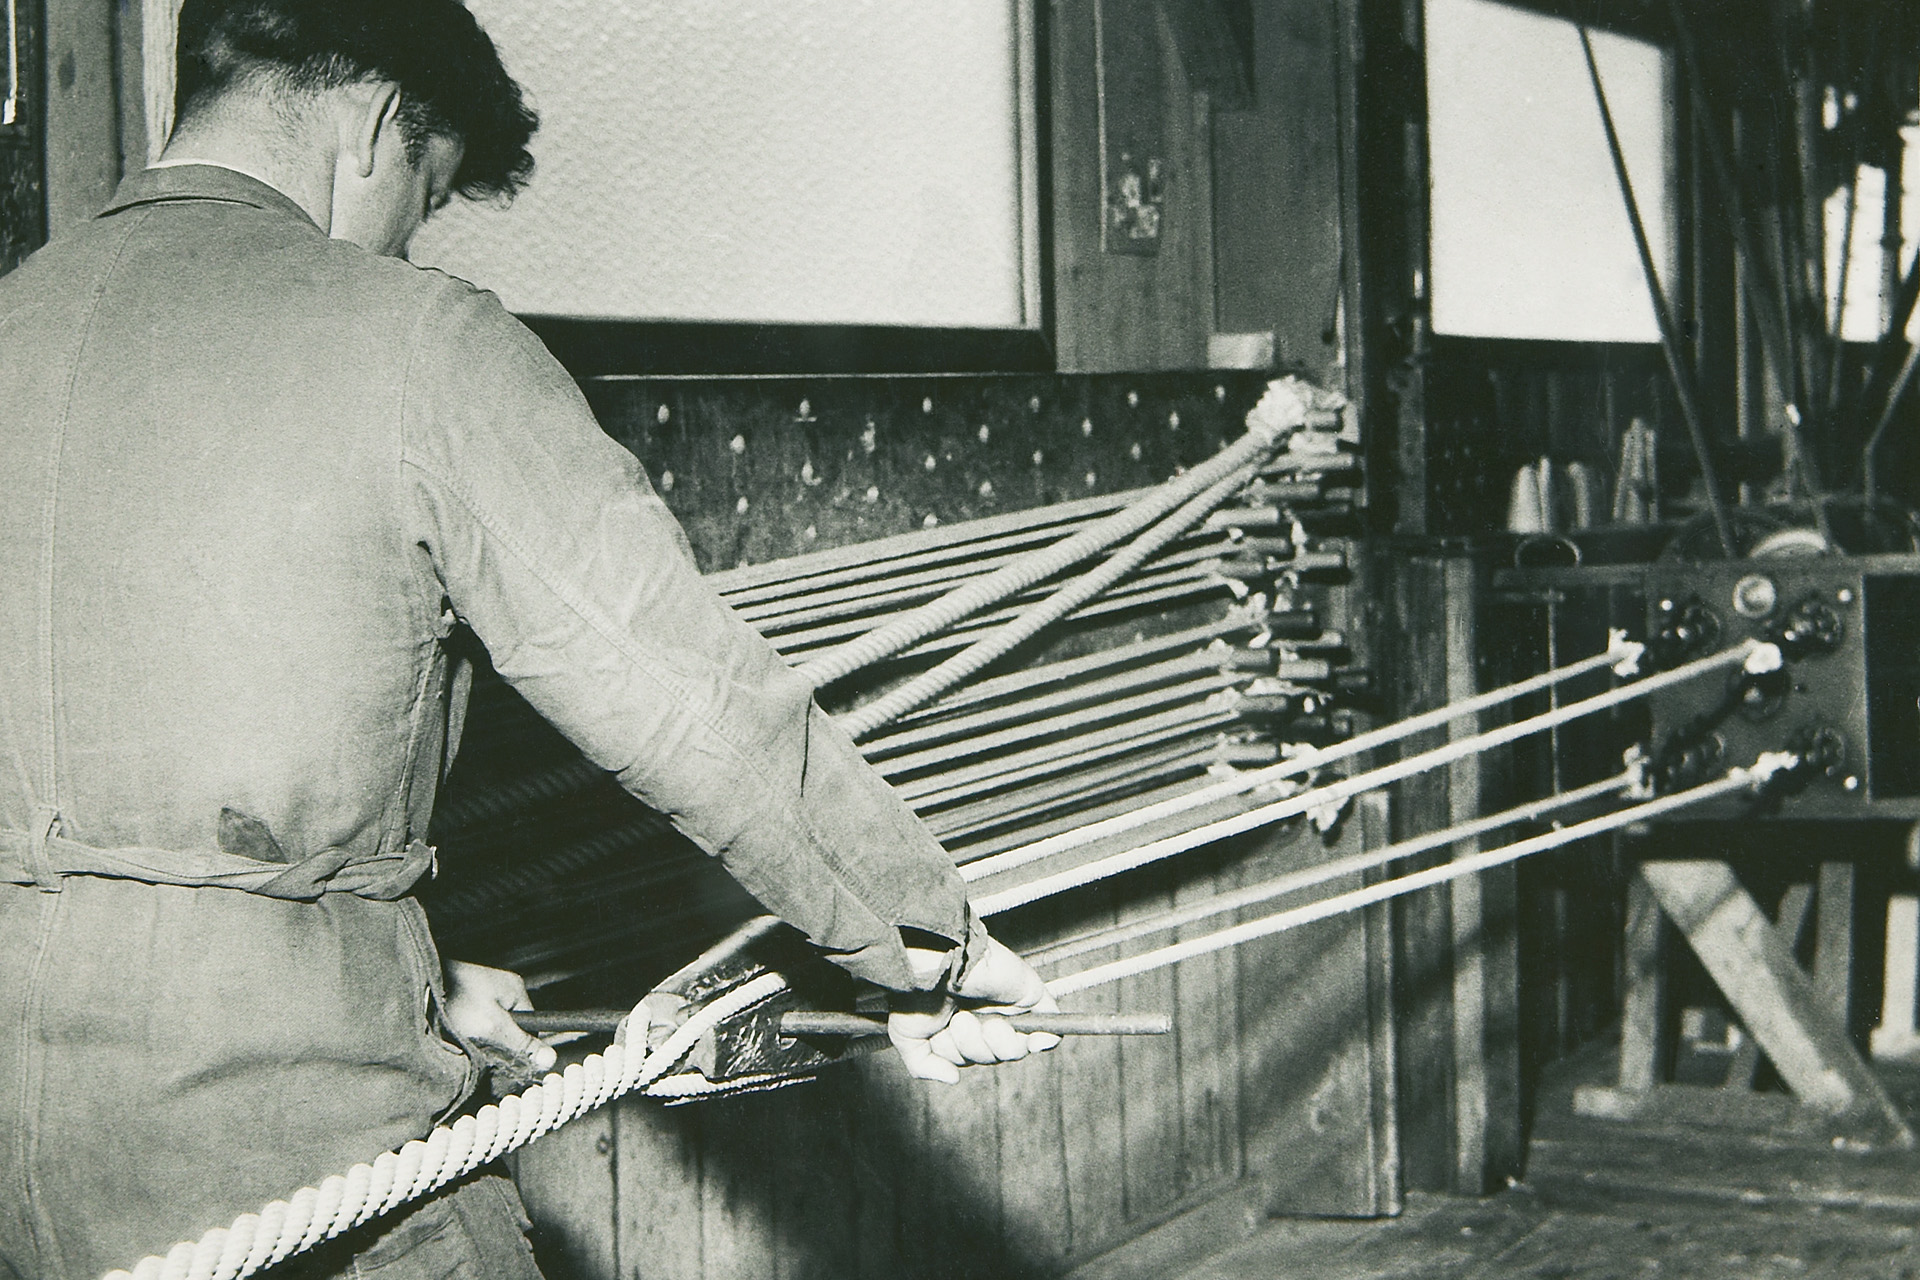 [Translate to Japan (JP), Japanese (Default):] An old photography of a worker producing a fibre rope in the 1950s